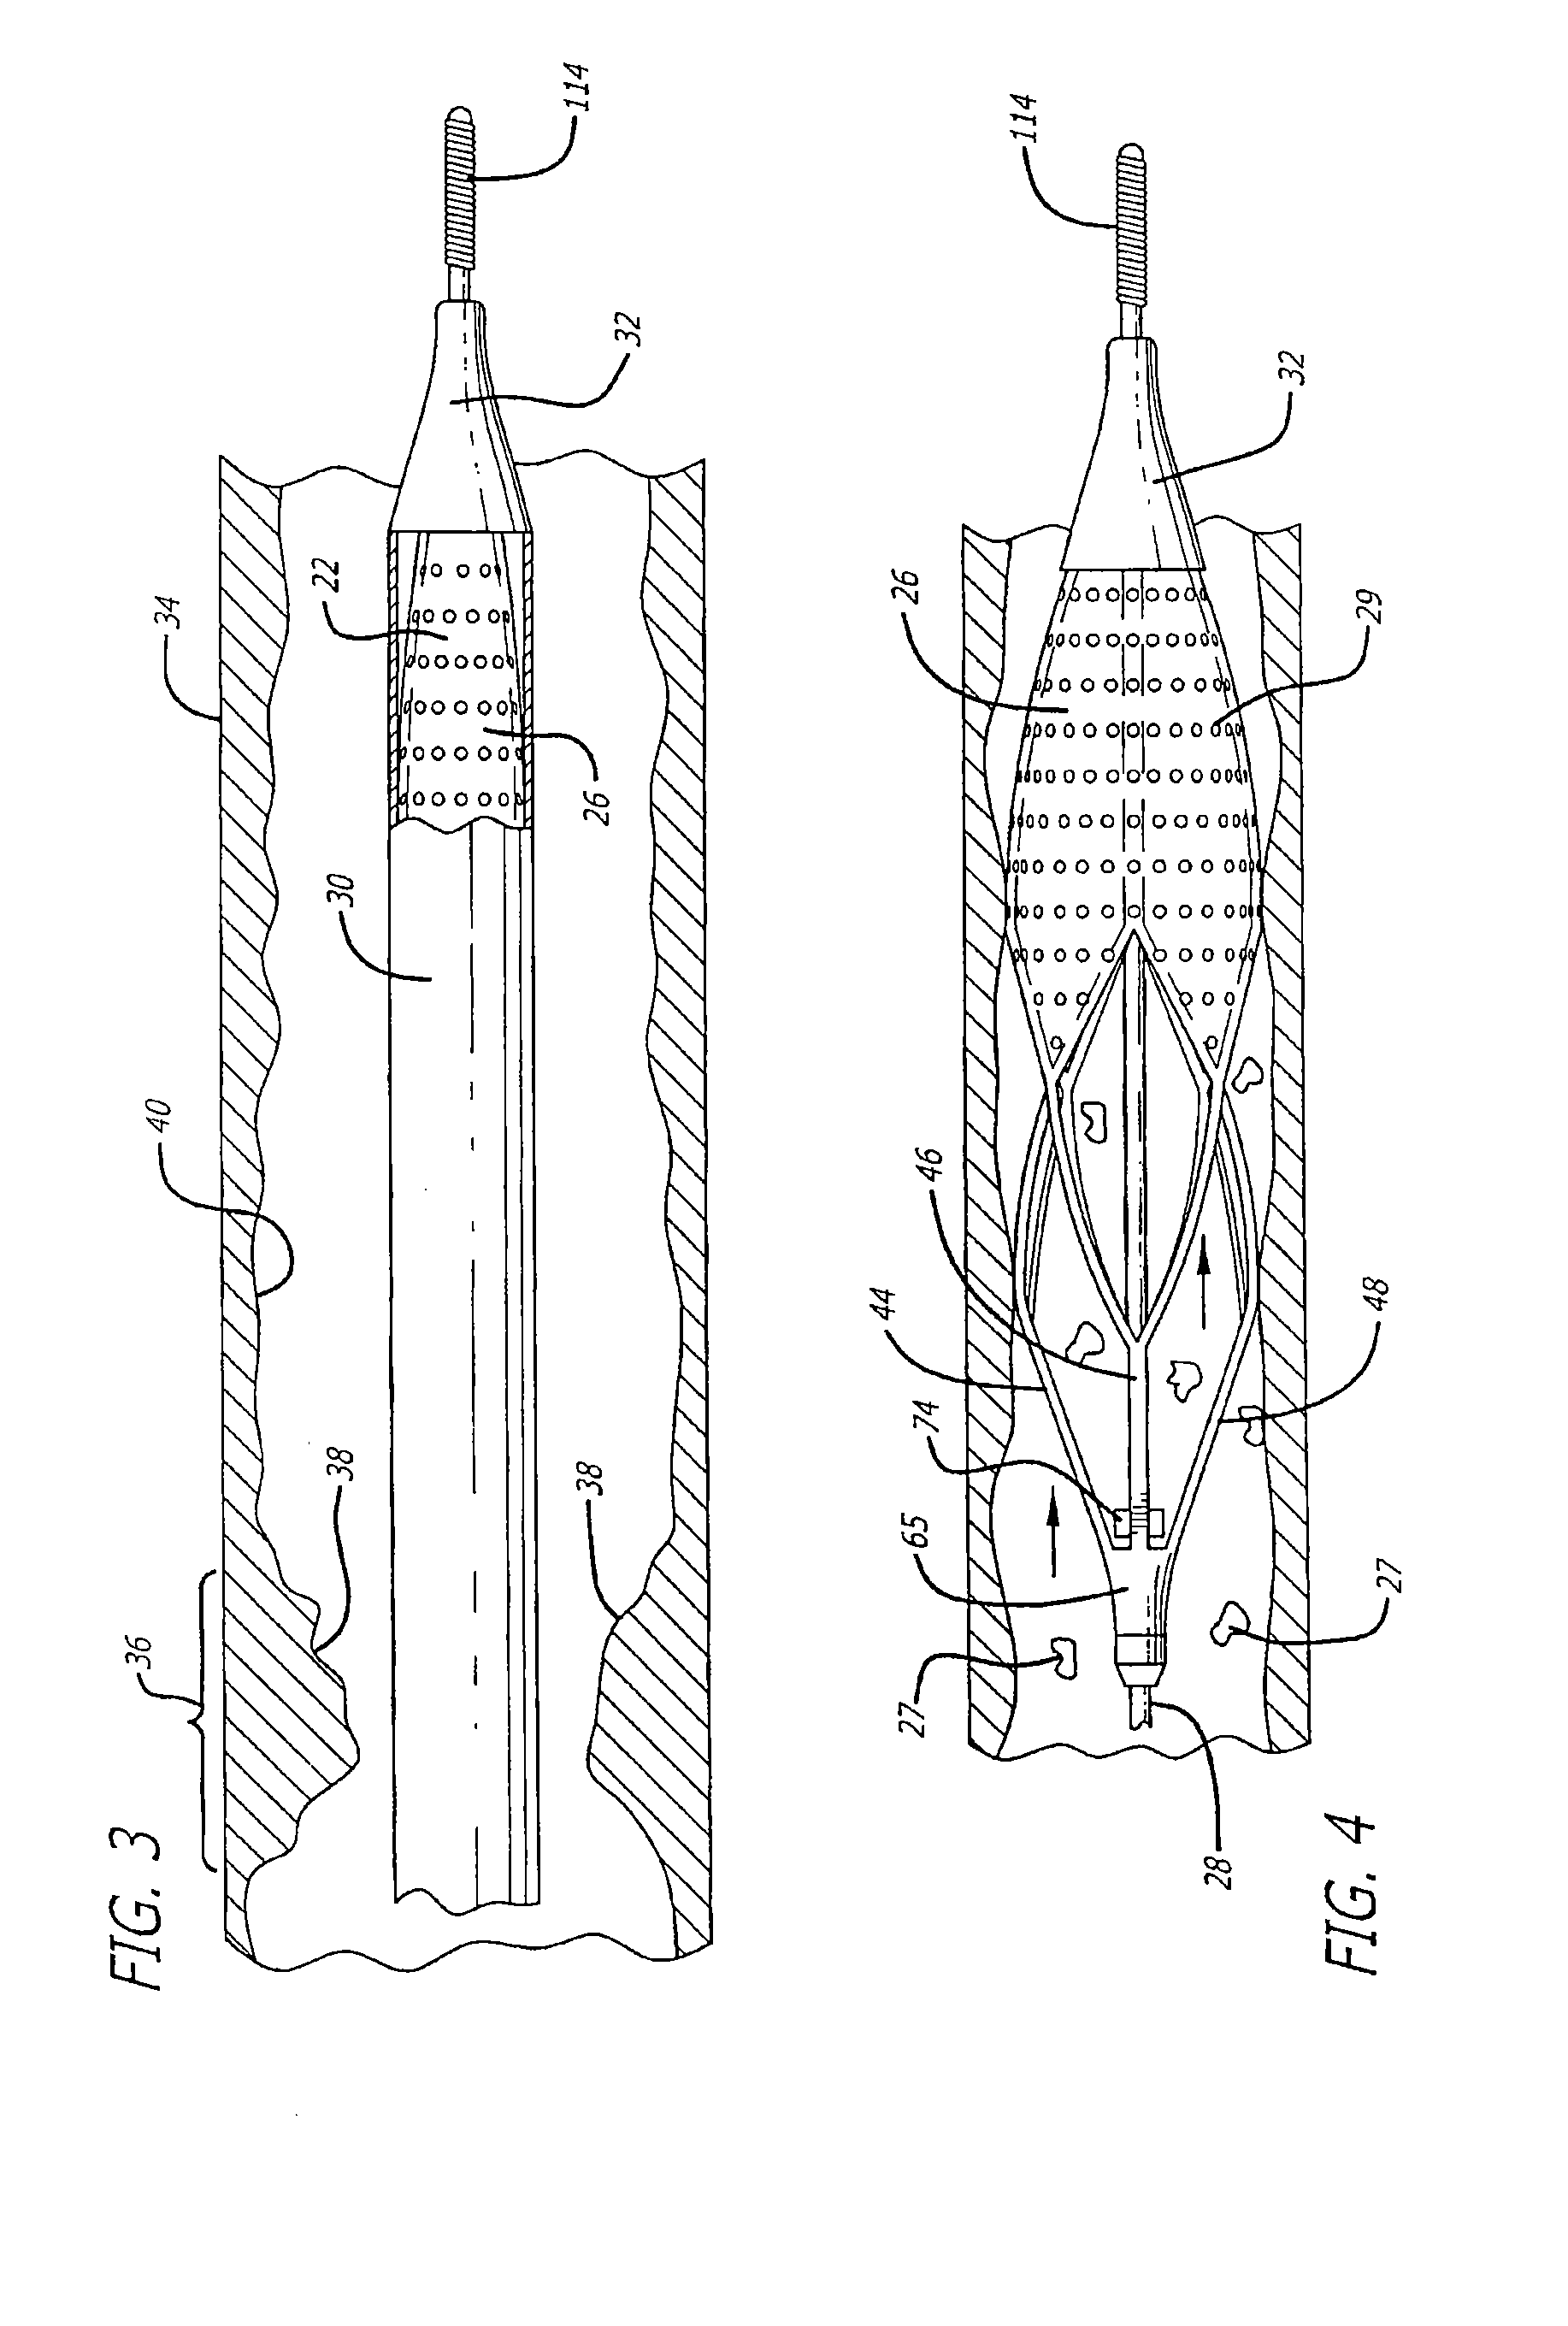 Cage and sleeve assembly for a filtering device